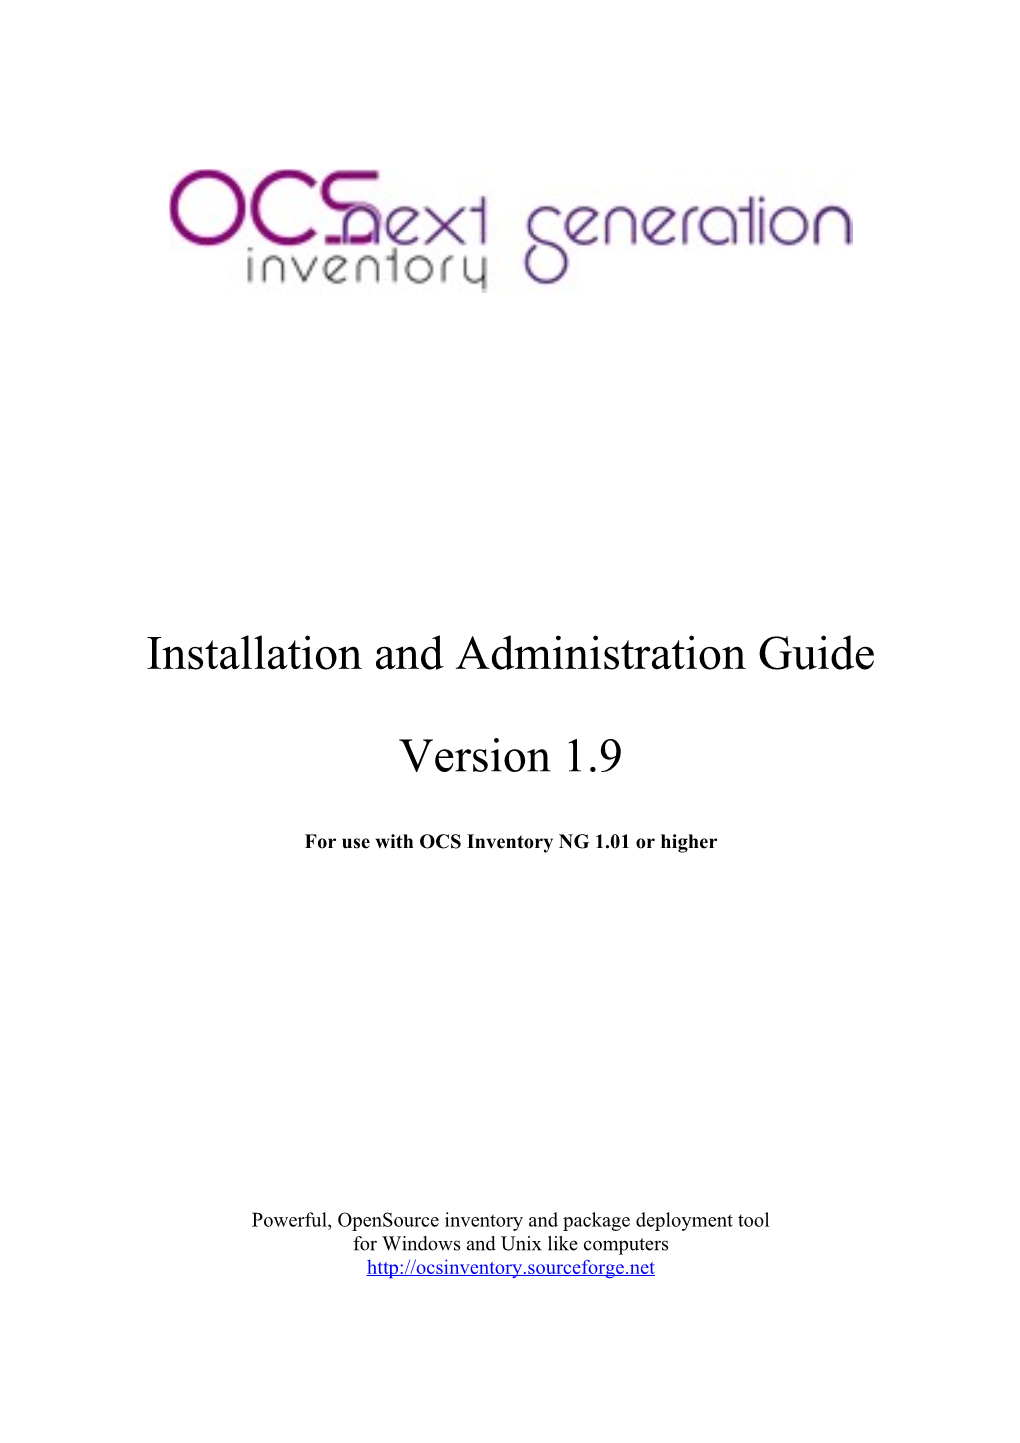 Installation and Administration Guide Version